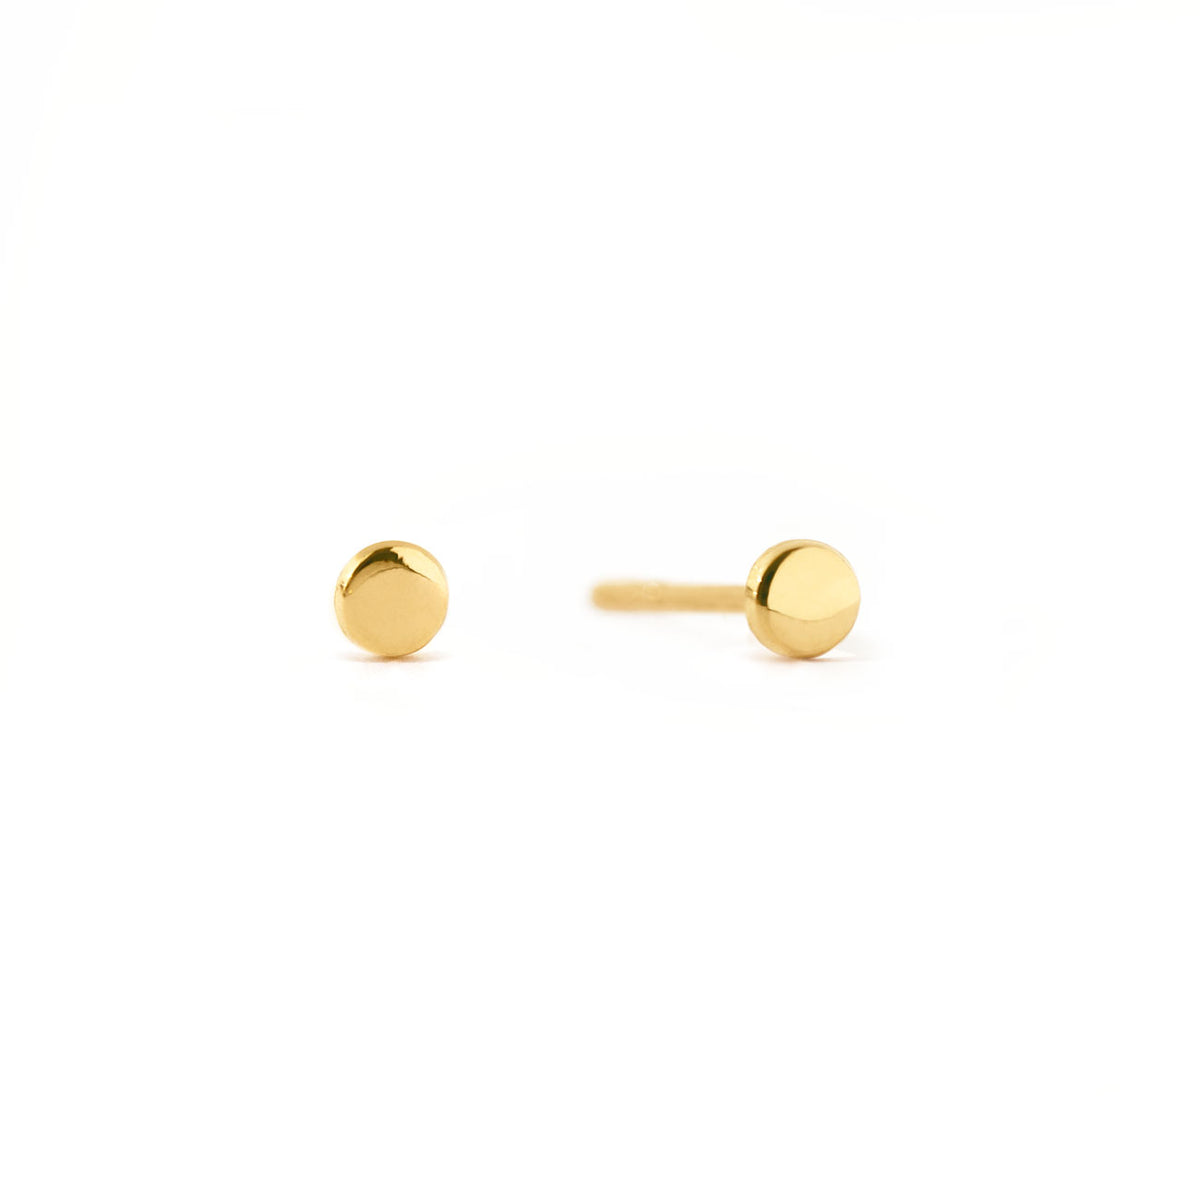 Tiny Round Disc Studs, 14K Gold Earrings, Solid Gold Earrings, – AMYO ...